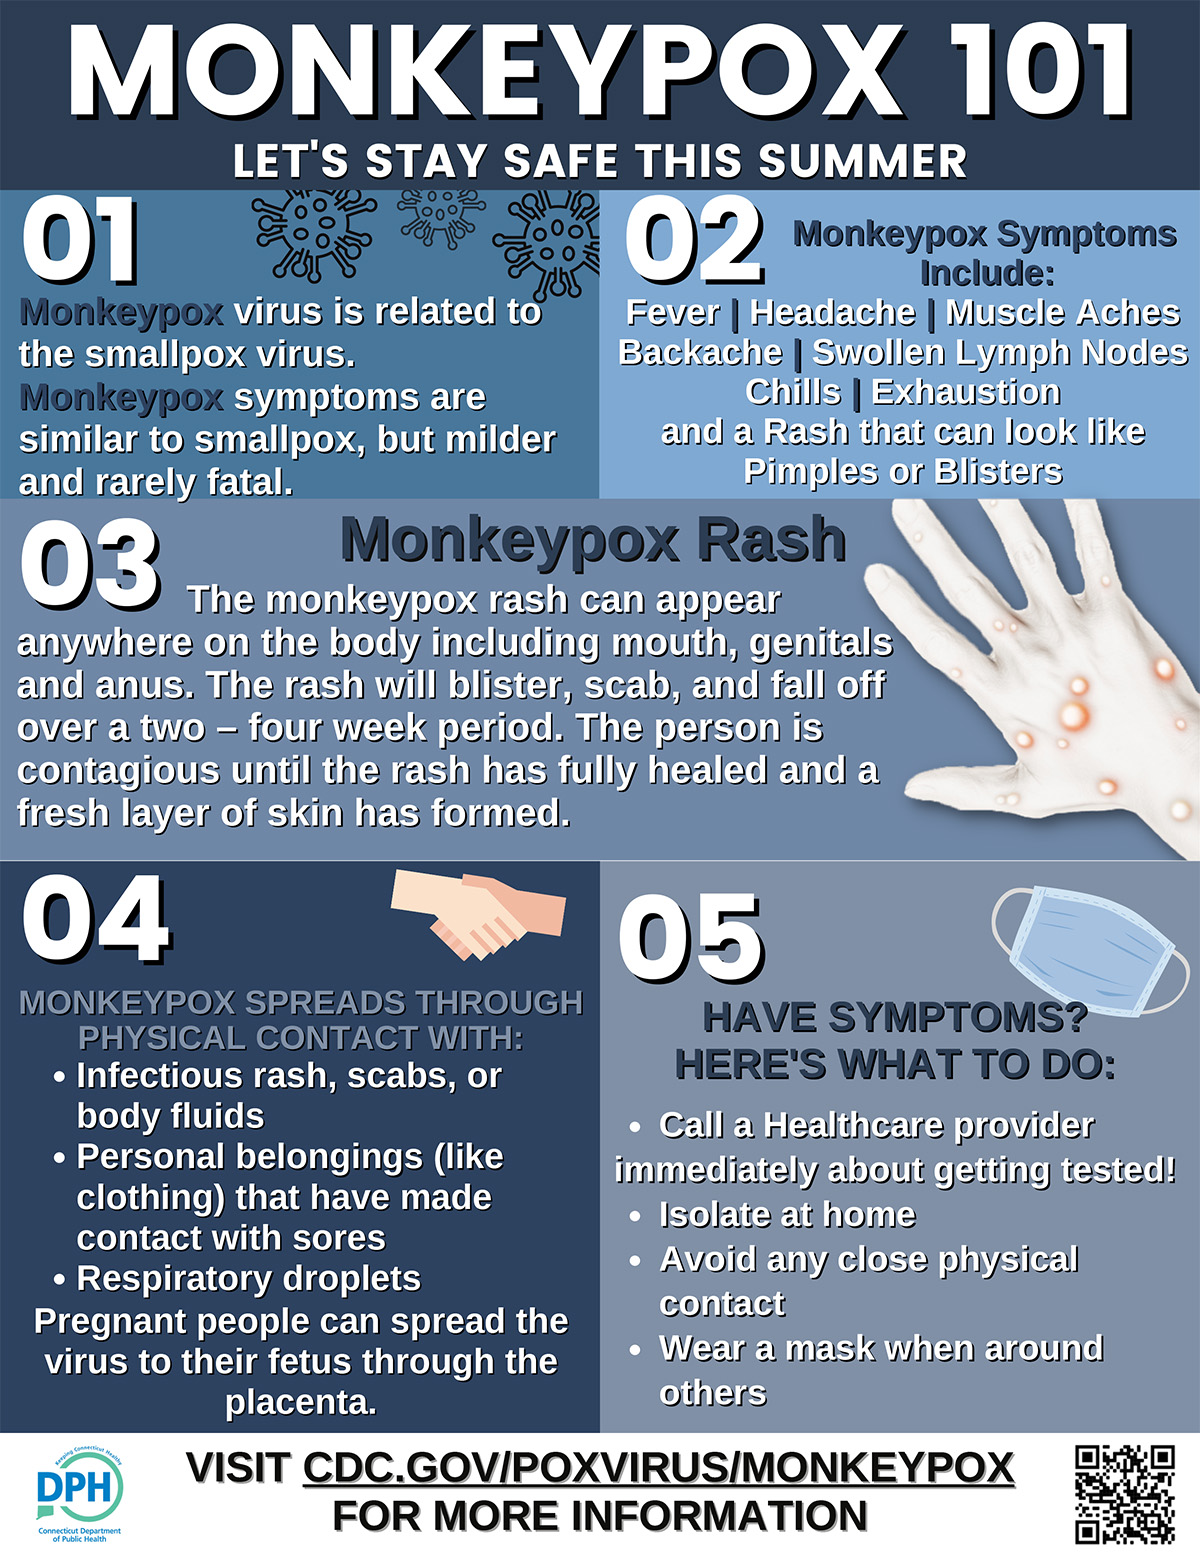 Learn more about Monkeypox with this 101 guide – Let's stay safe this summer